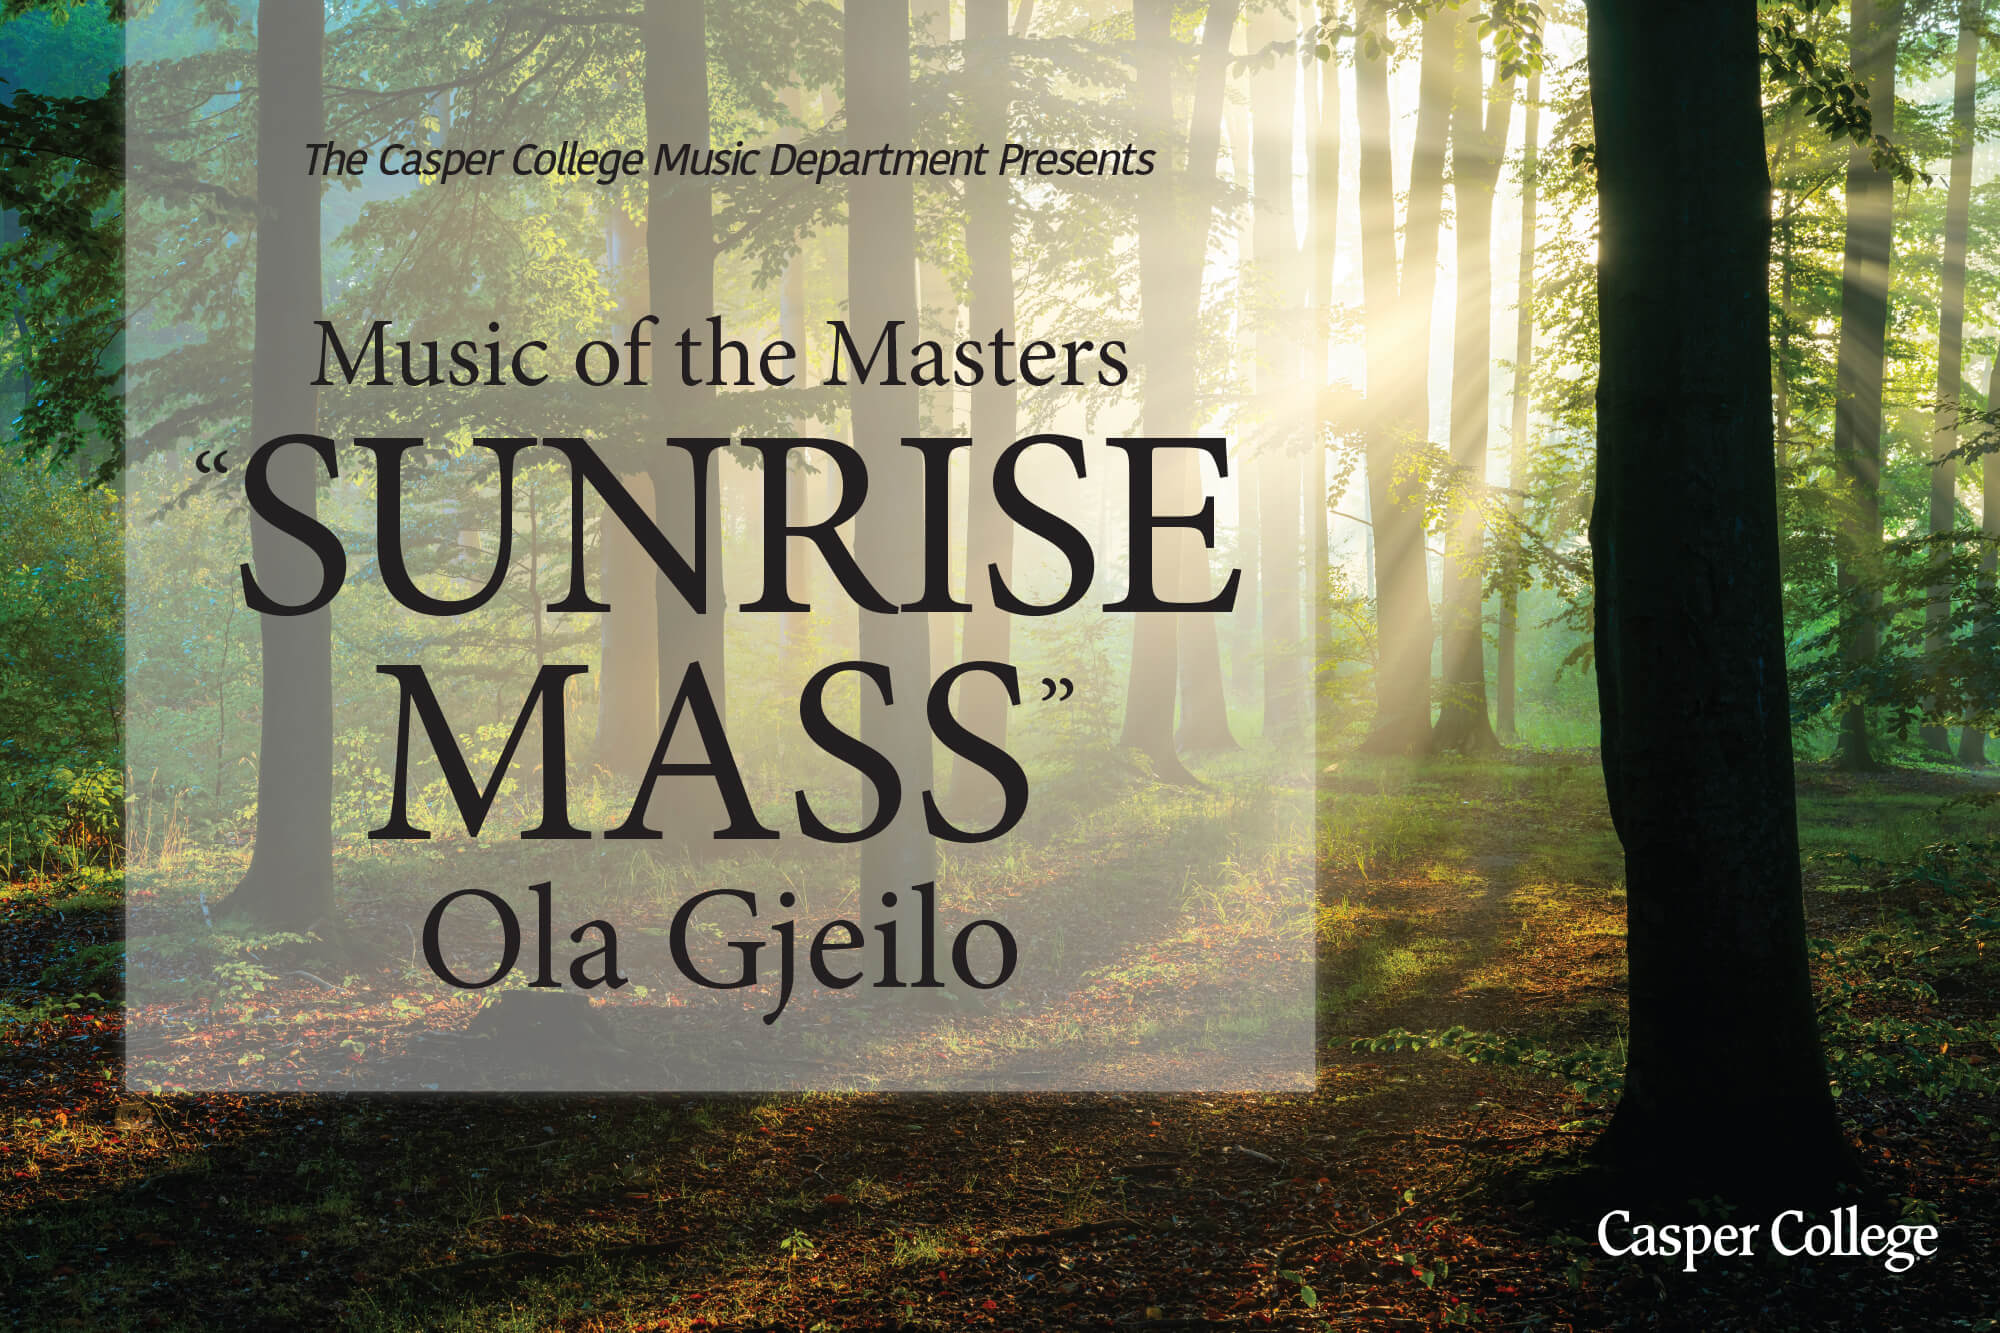 Image created for the "Music of the Masters" concert press release.